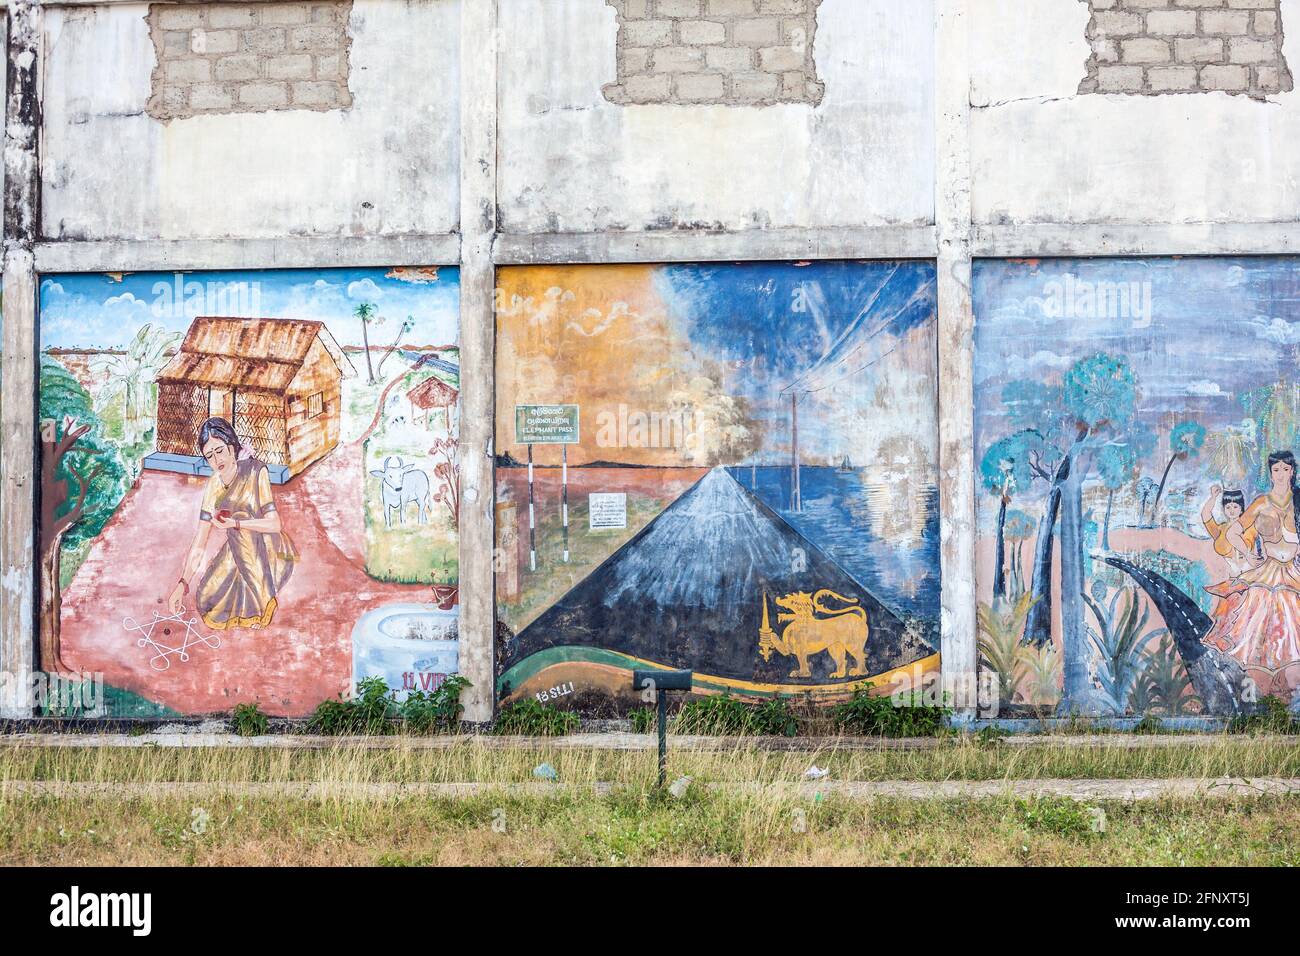 Artwork left over from the civil war on a wall by the beach in Kankesanturai, Northern Province, Sri Lanka Stock Photo